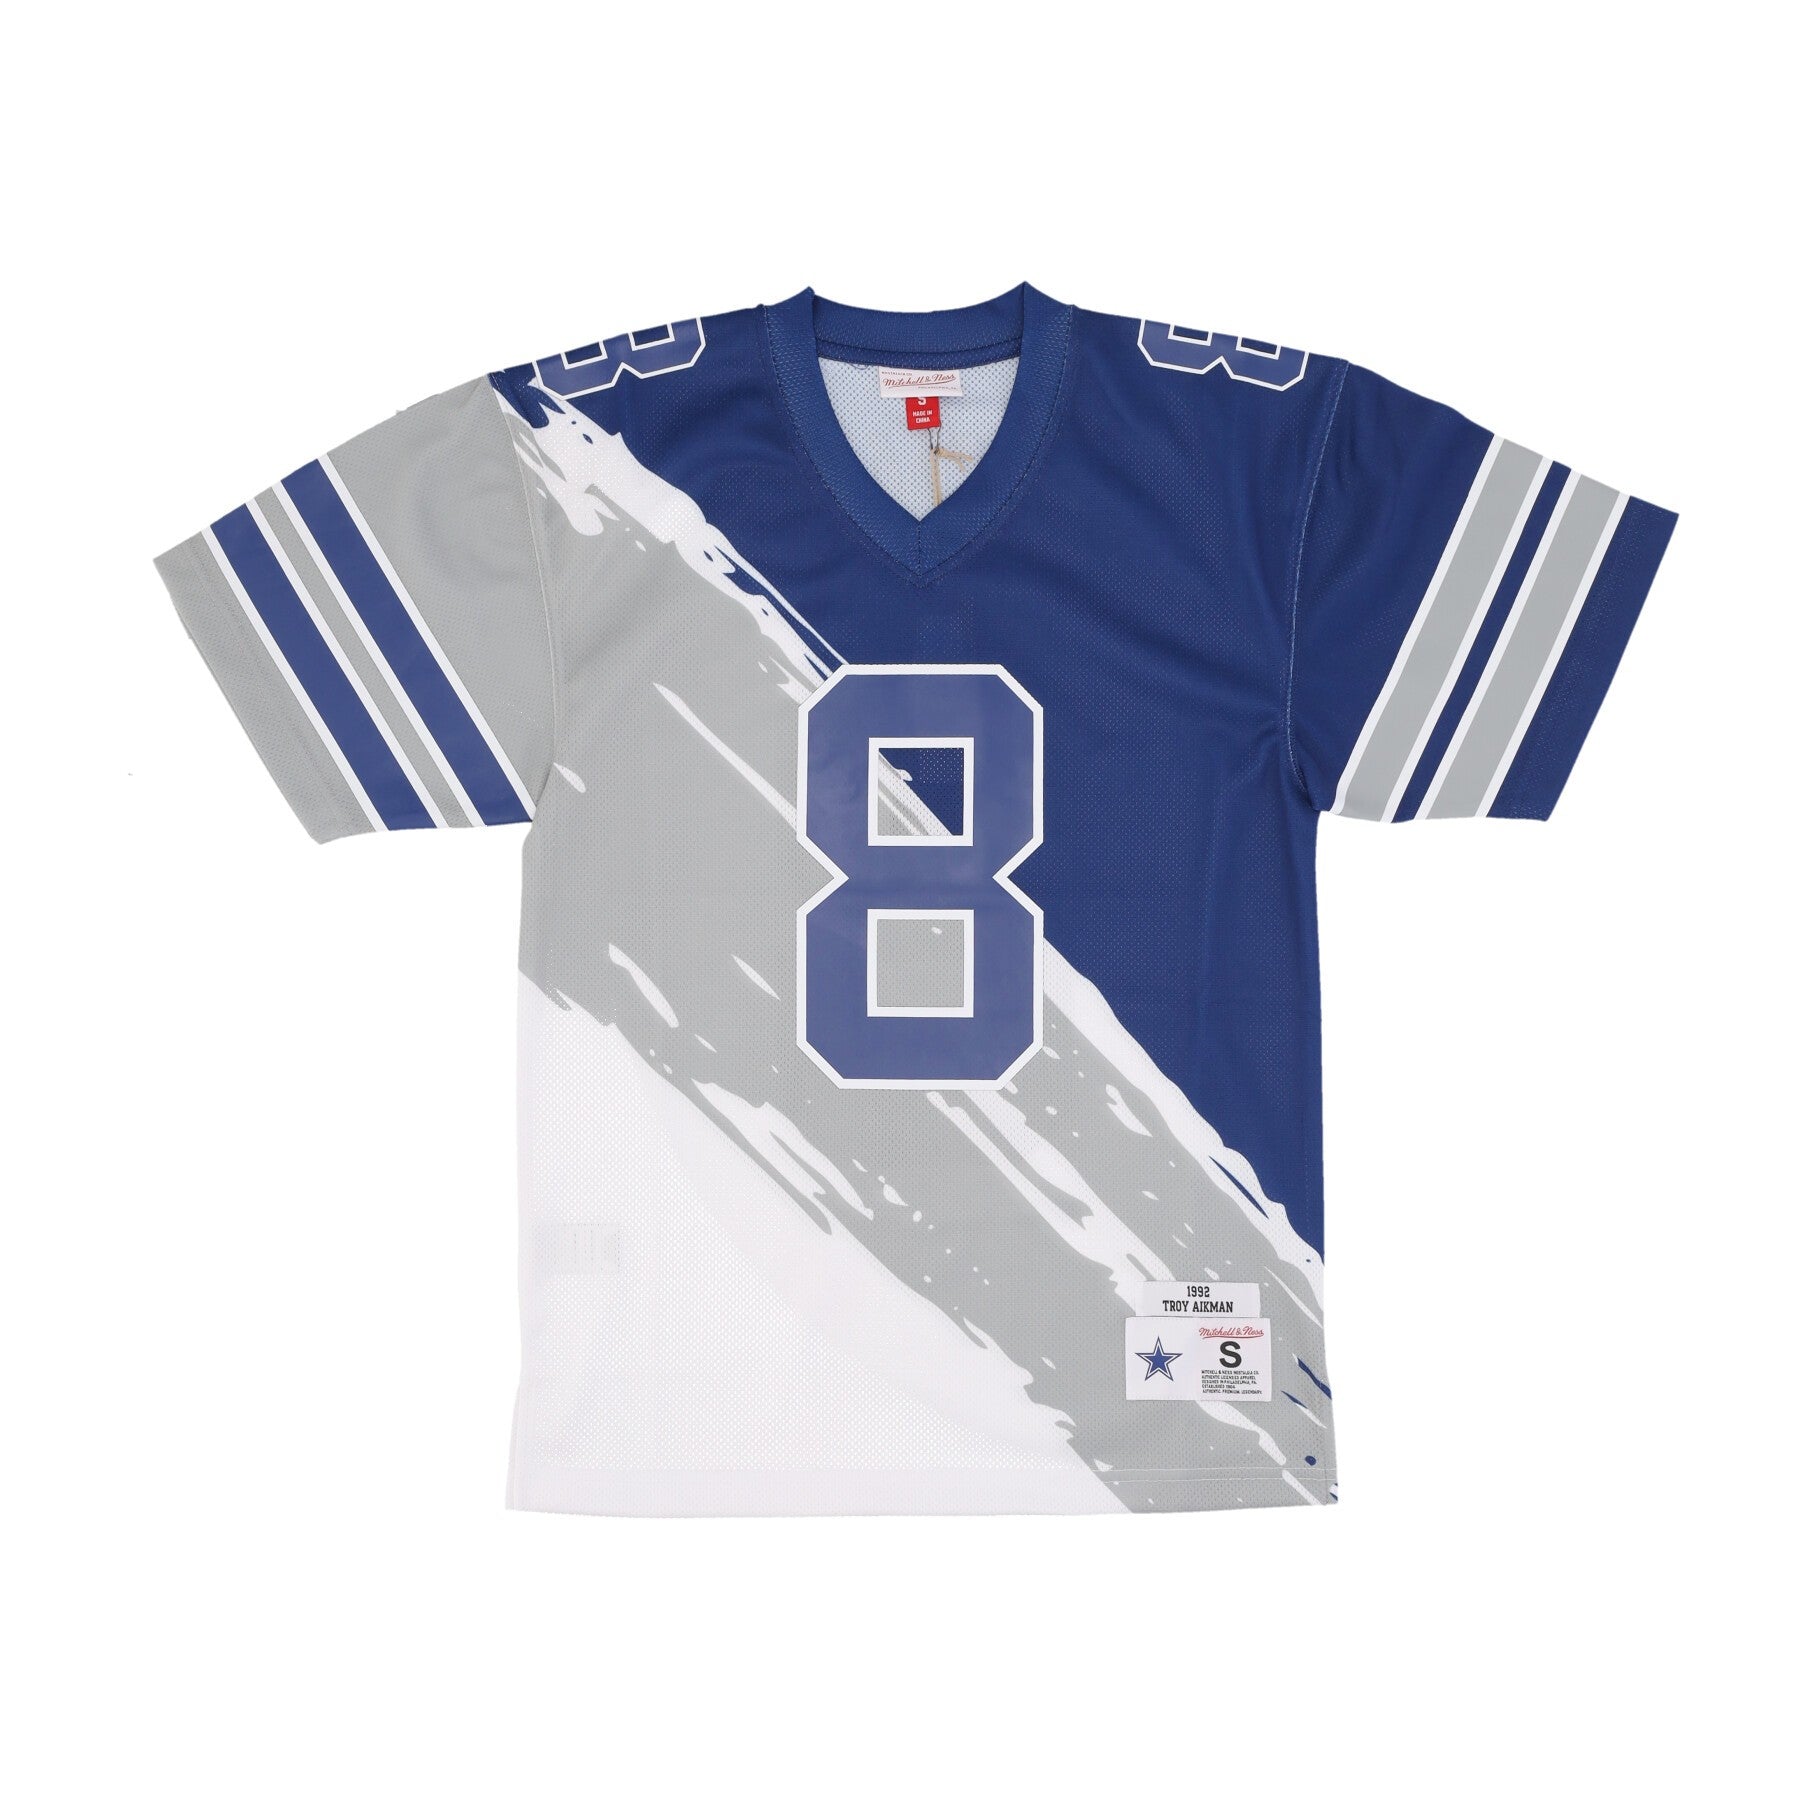 Mitchell & Ness, Casacca Football Americano Uomo Nfl Paint Brush Crew Pullover No 8 Troy Aikman Dalcow, Multi/white